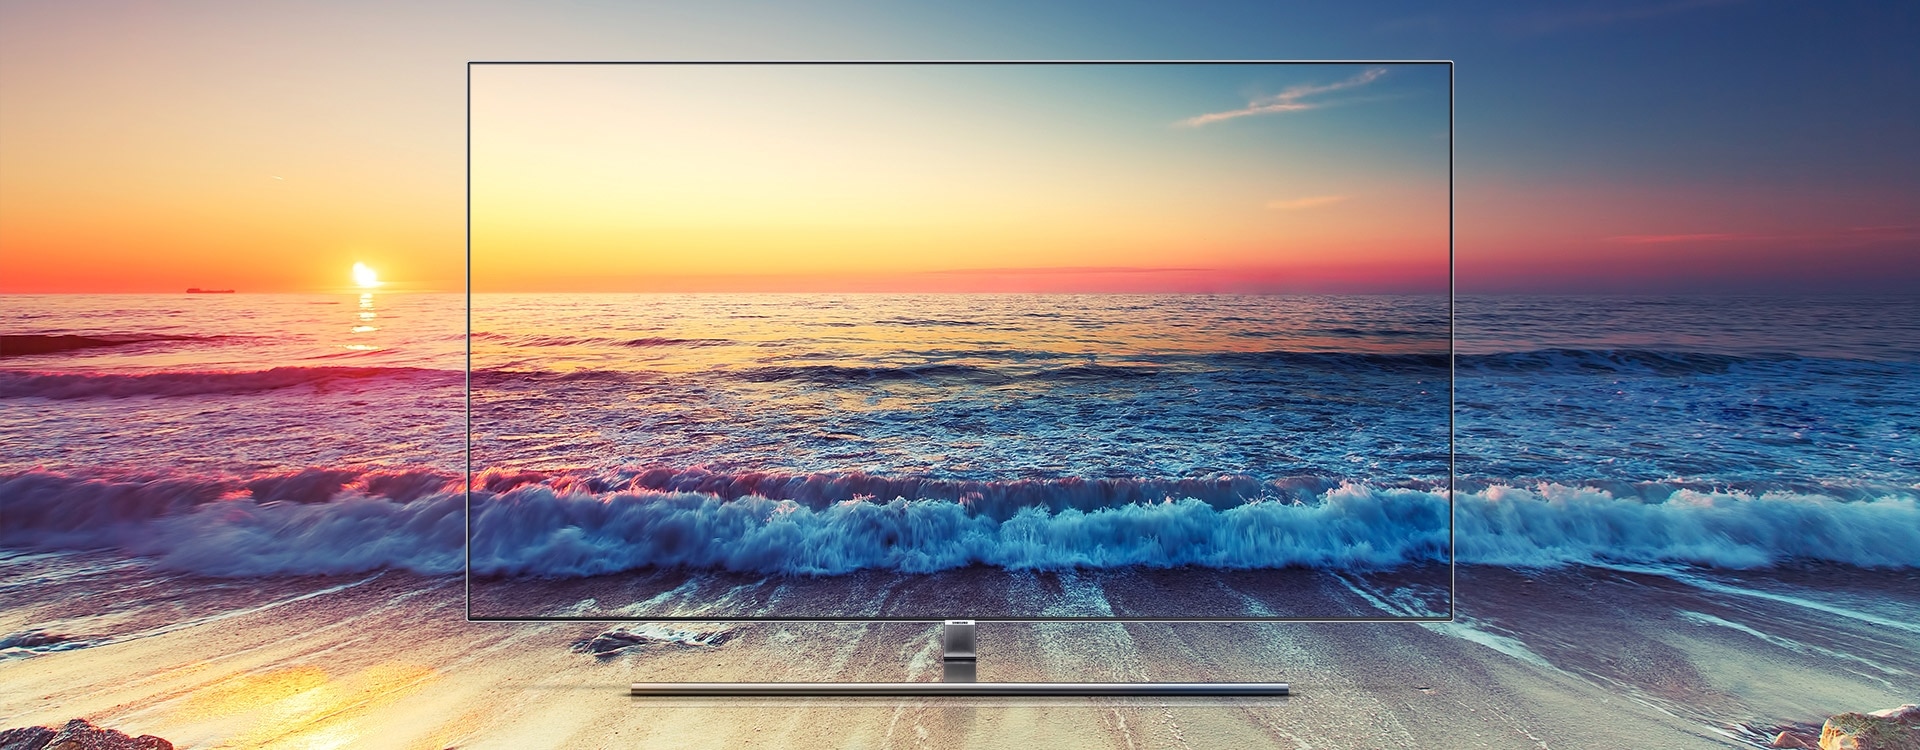 A scenery of a sunset beach is shown in rich colors along with Samsung QLED TV